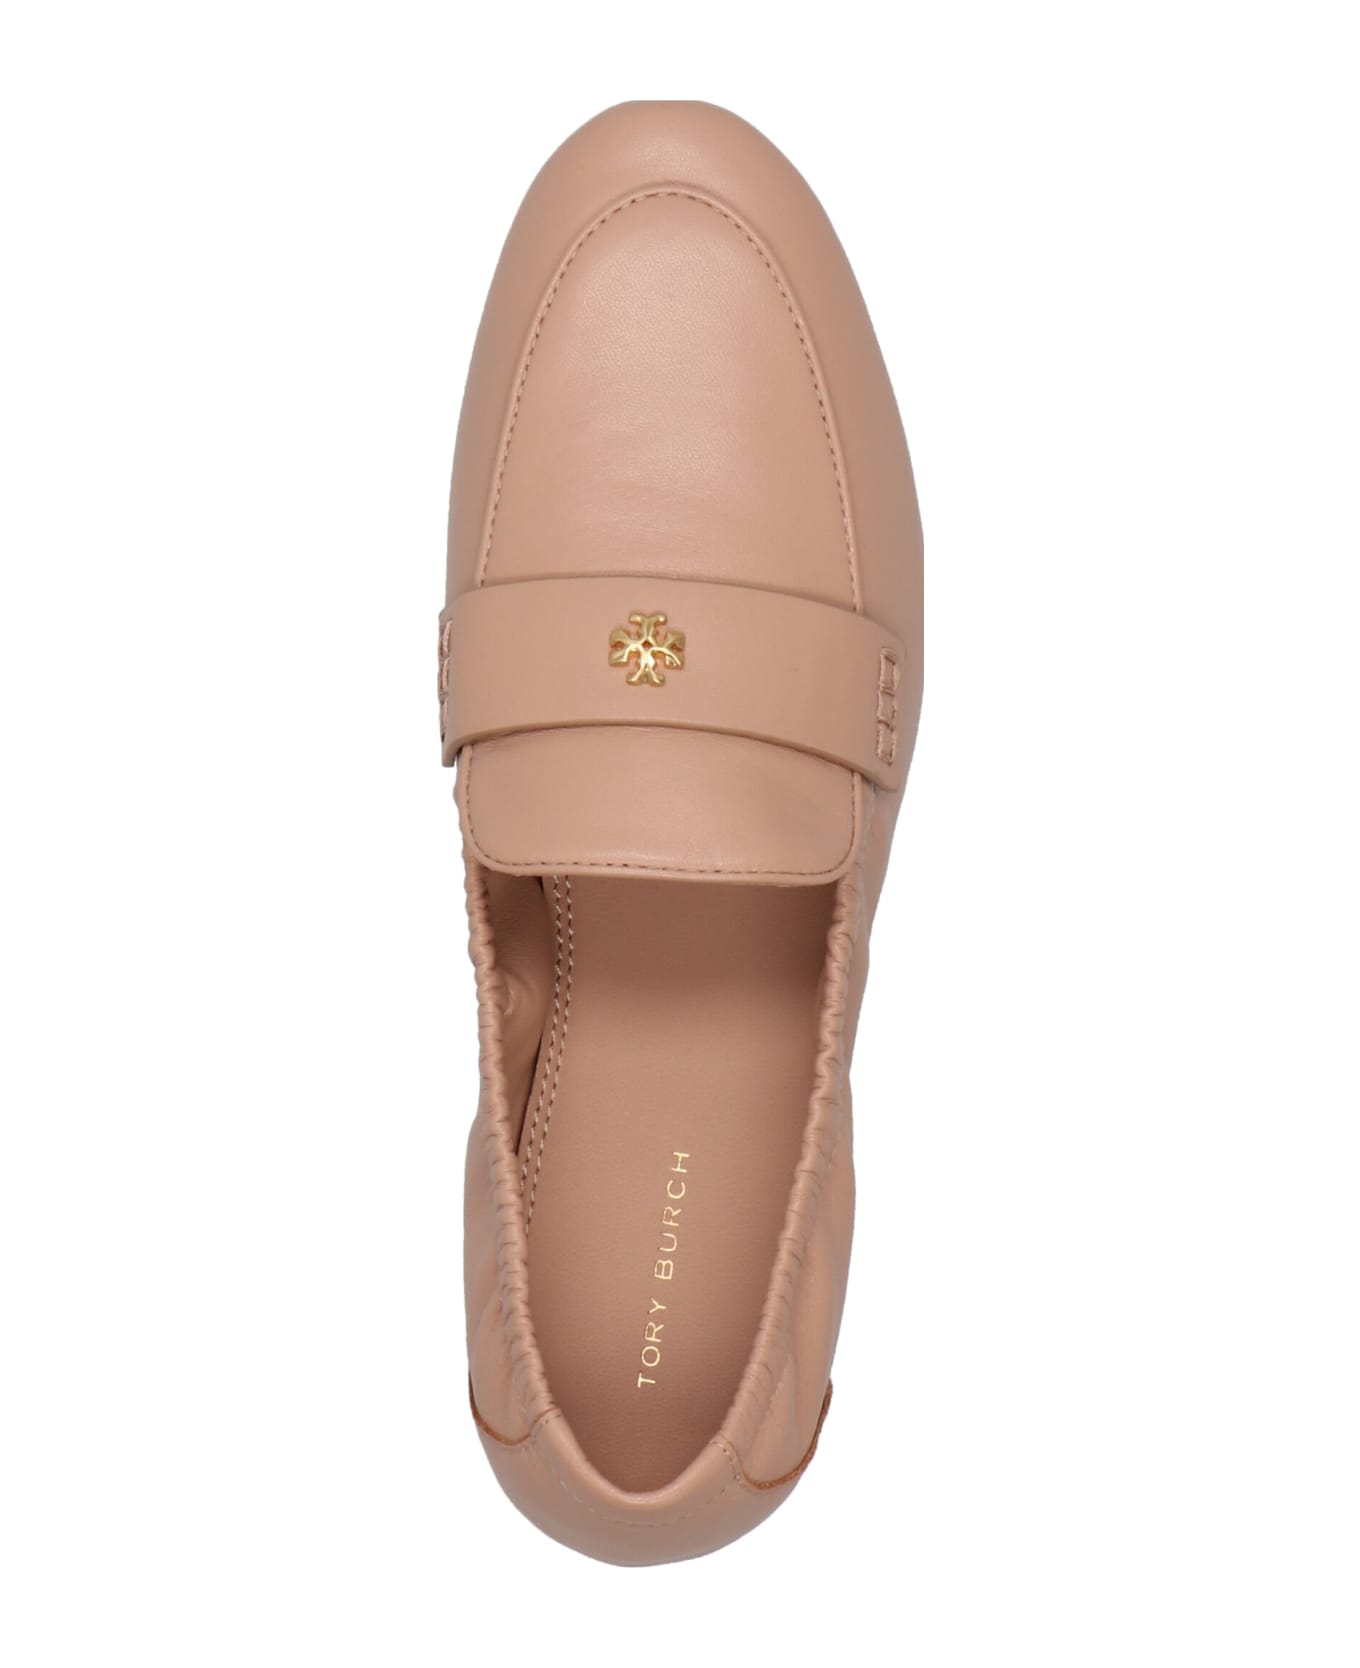 Tory Burch 'ballet' Loafers - Pink